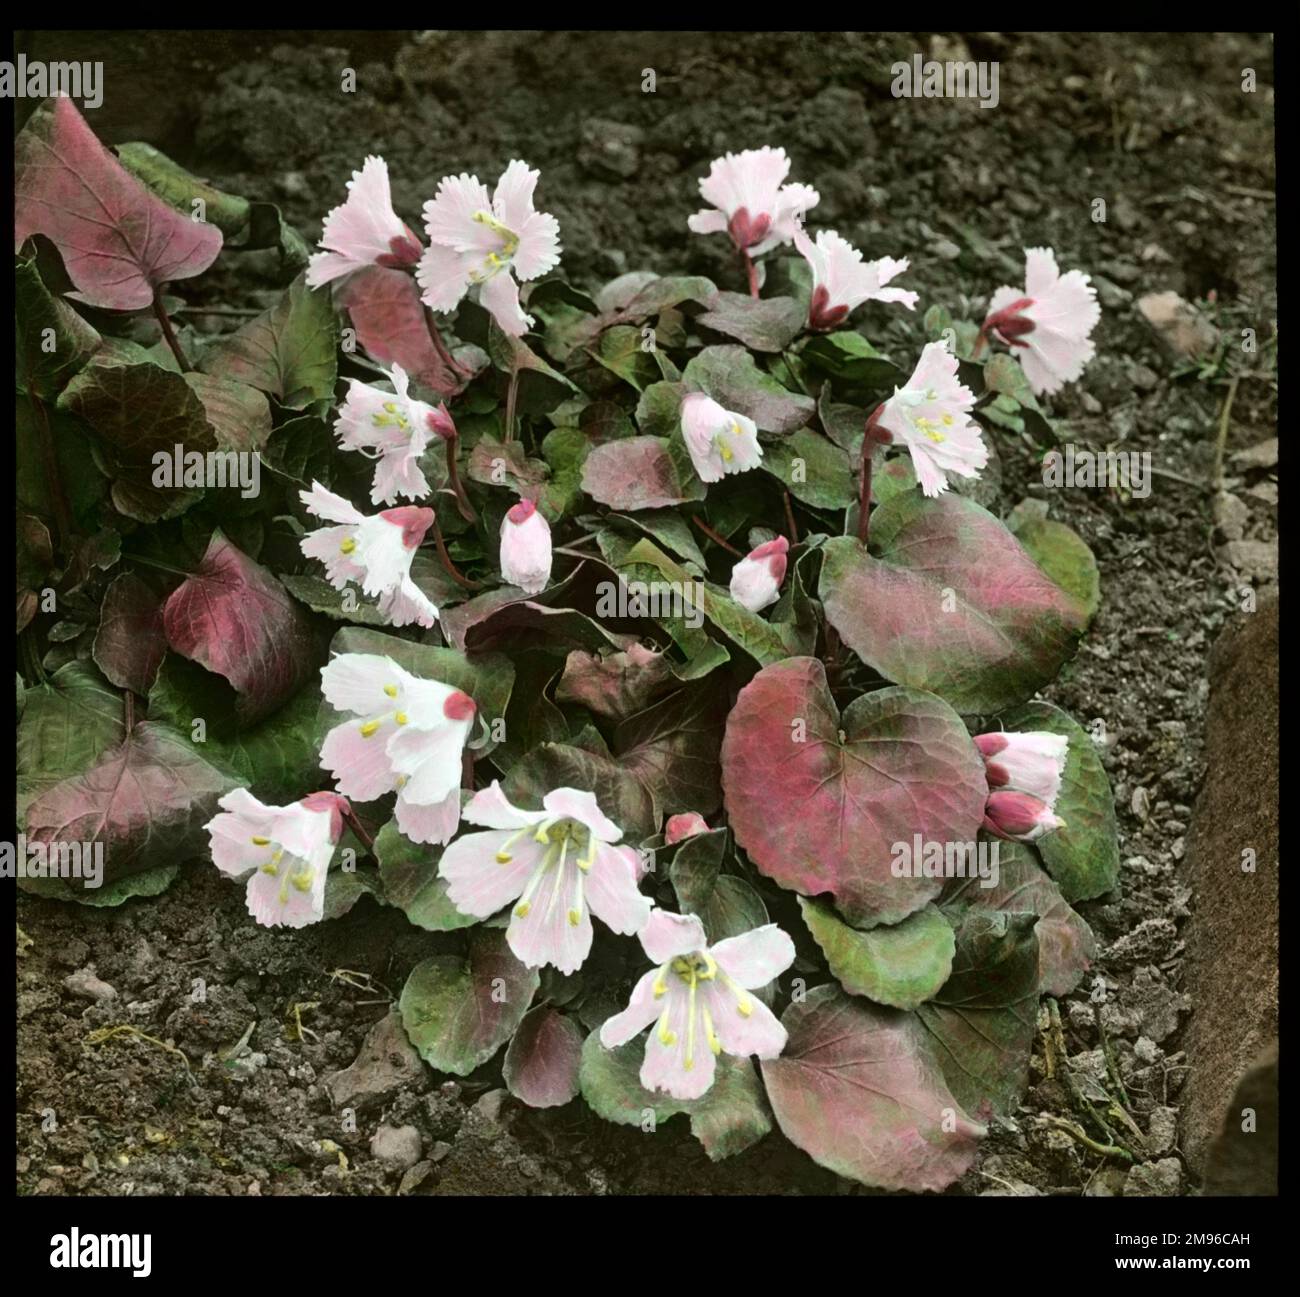 Shortia Uniflora (Nippon Bells), a flowering plant of the Diapensiaceae family, with pale pink flowers. Stock Photo